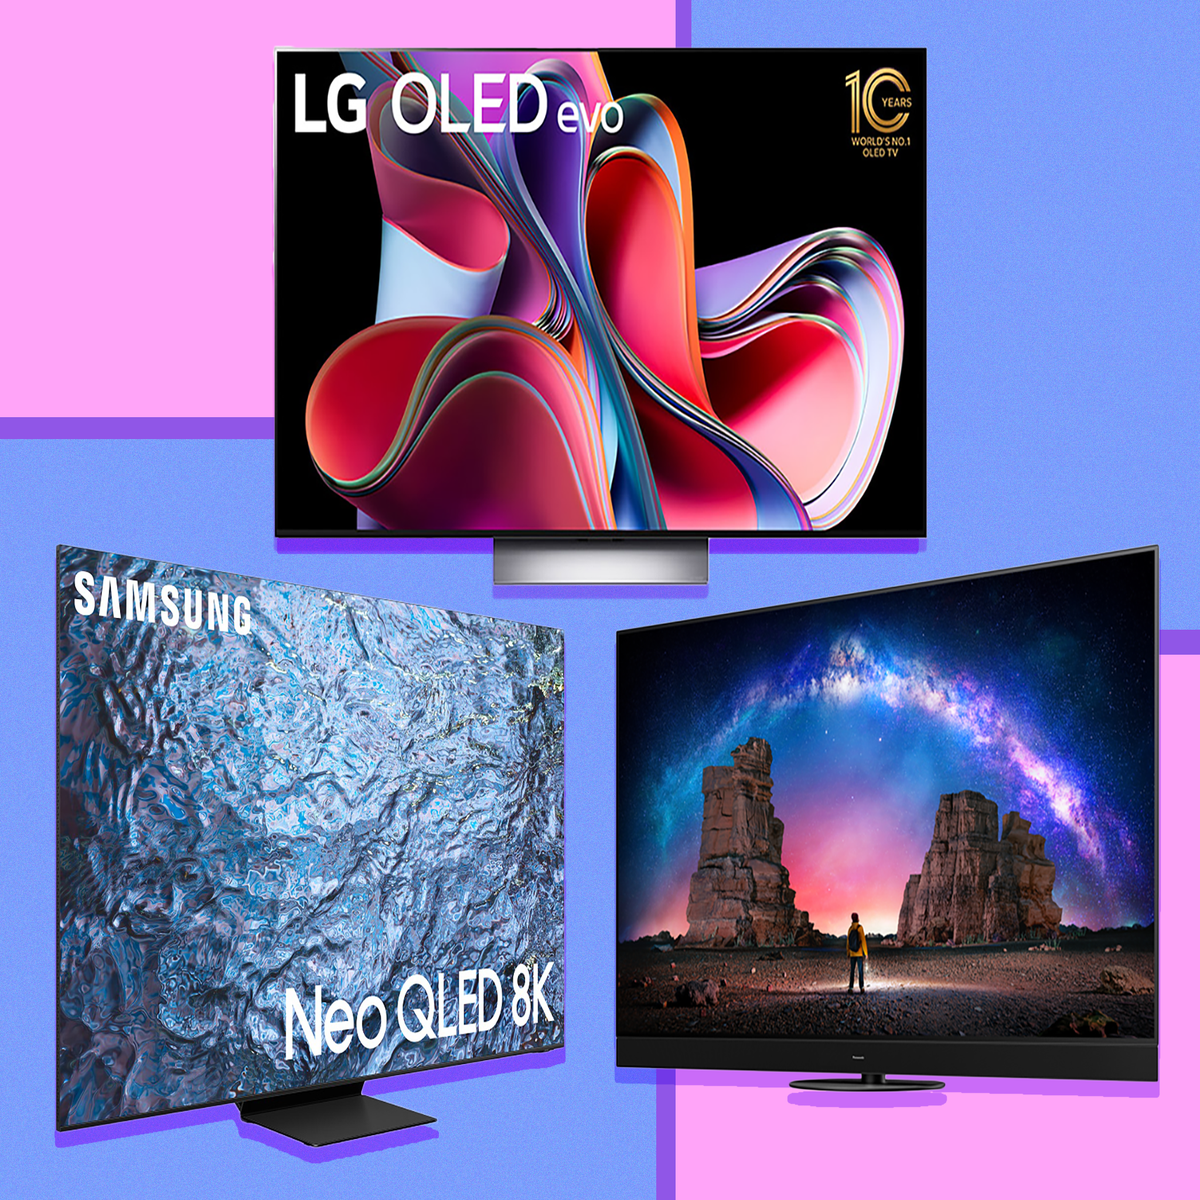 The best OLED TVs to buy for 2023 in the UK